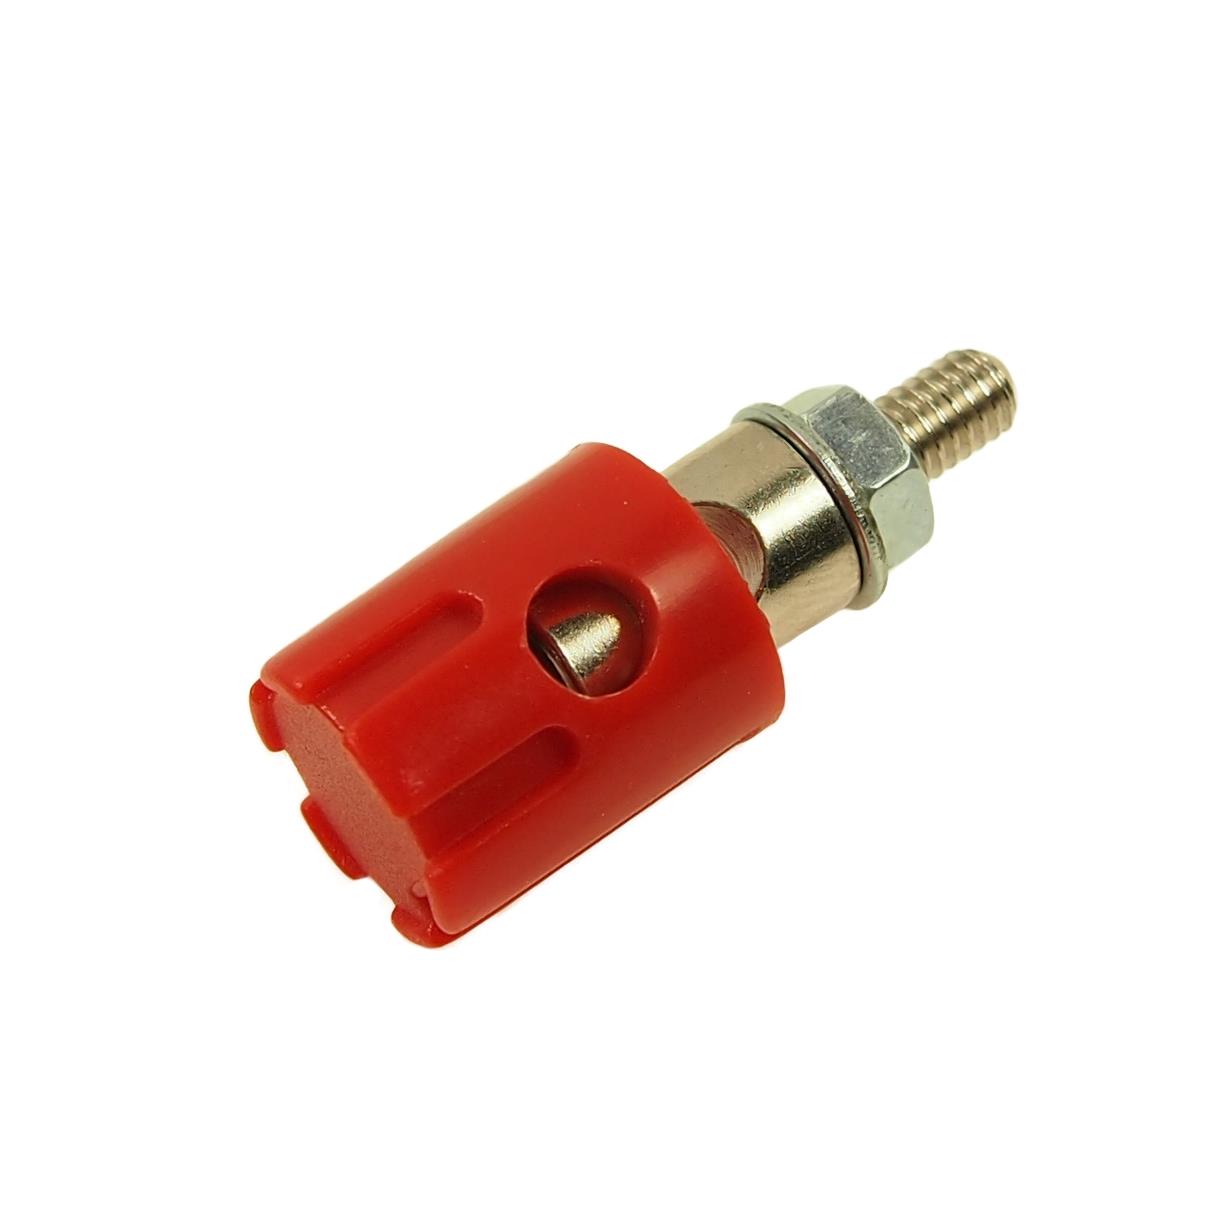 【CL681570】SPRING TERMINAL M4S SPT2 RED